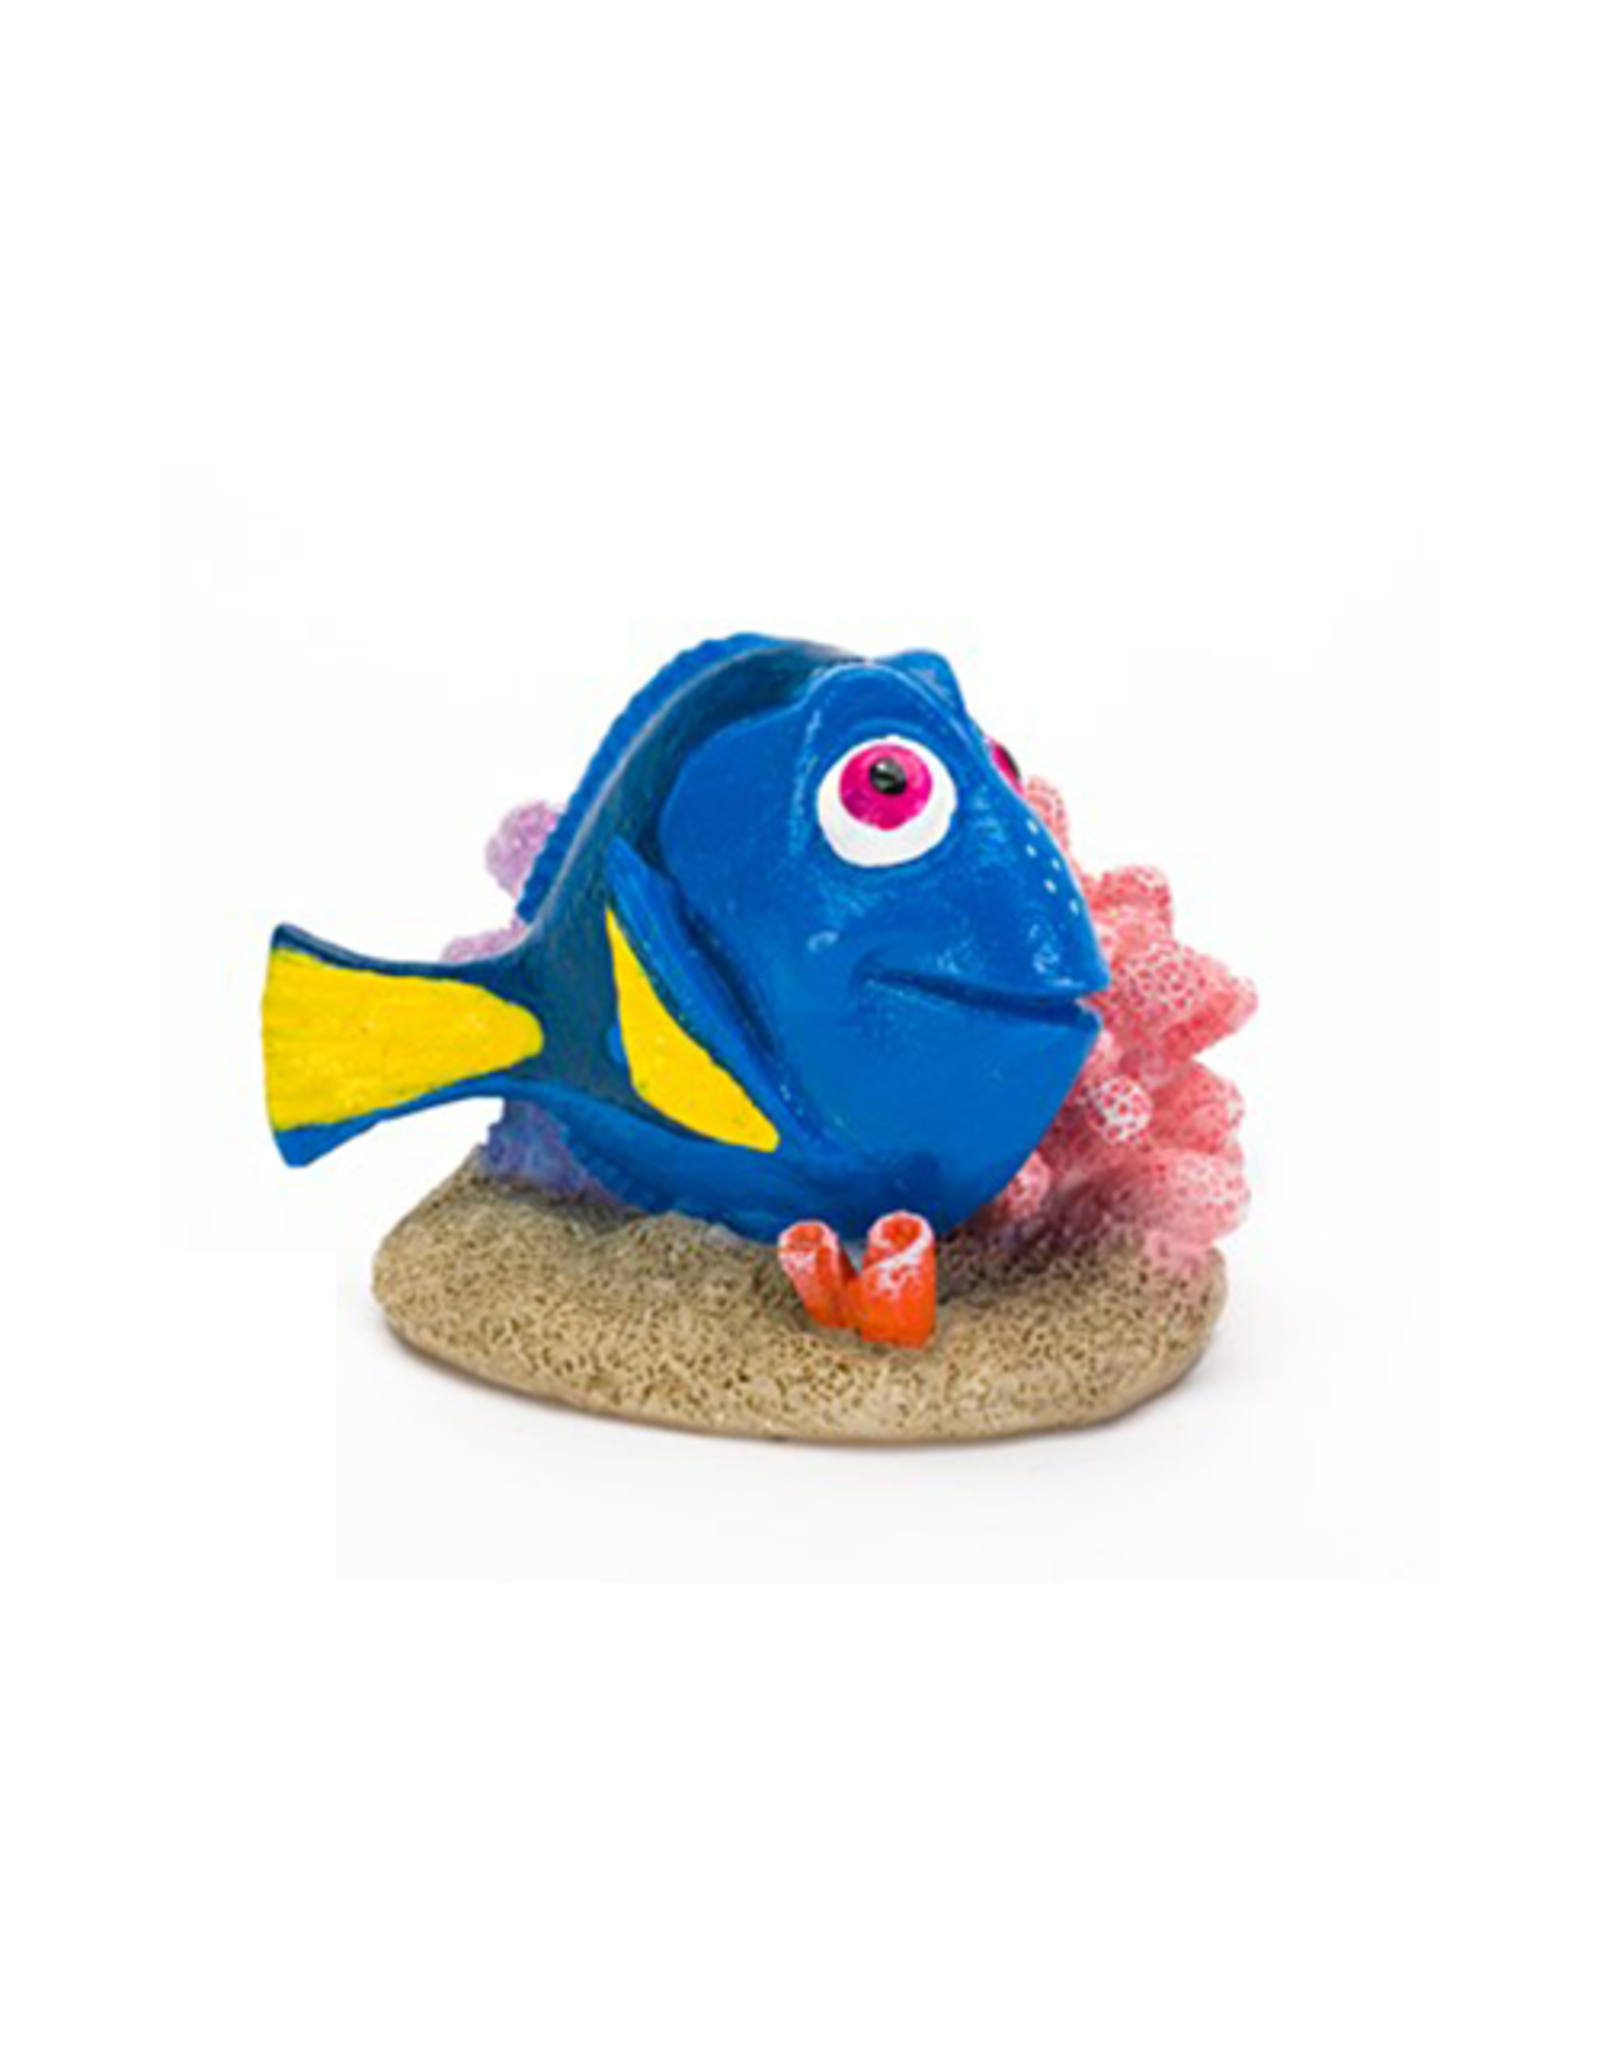 Penn Plax Penn Plax Finding Dory Dory with Coral Mini